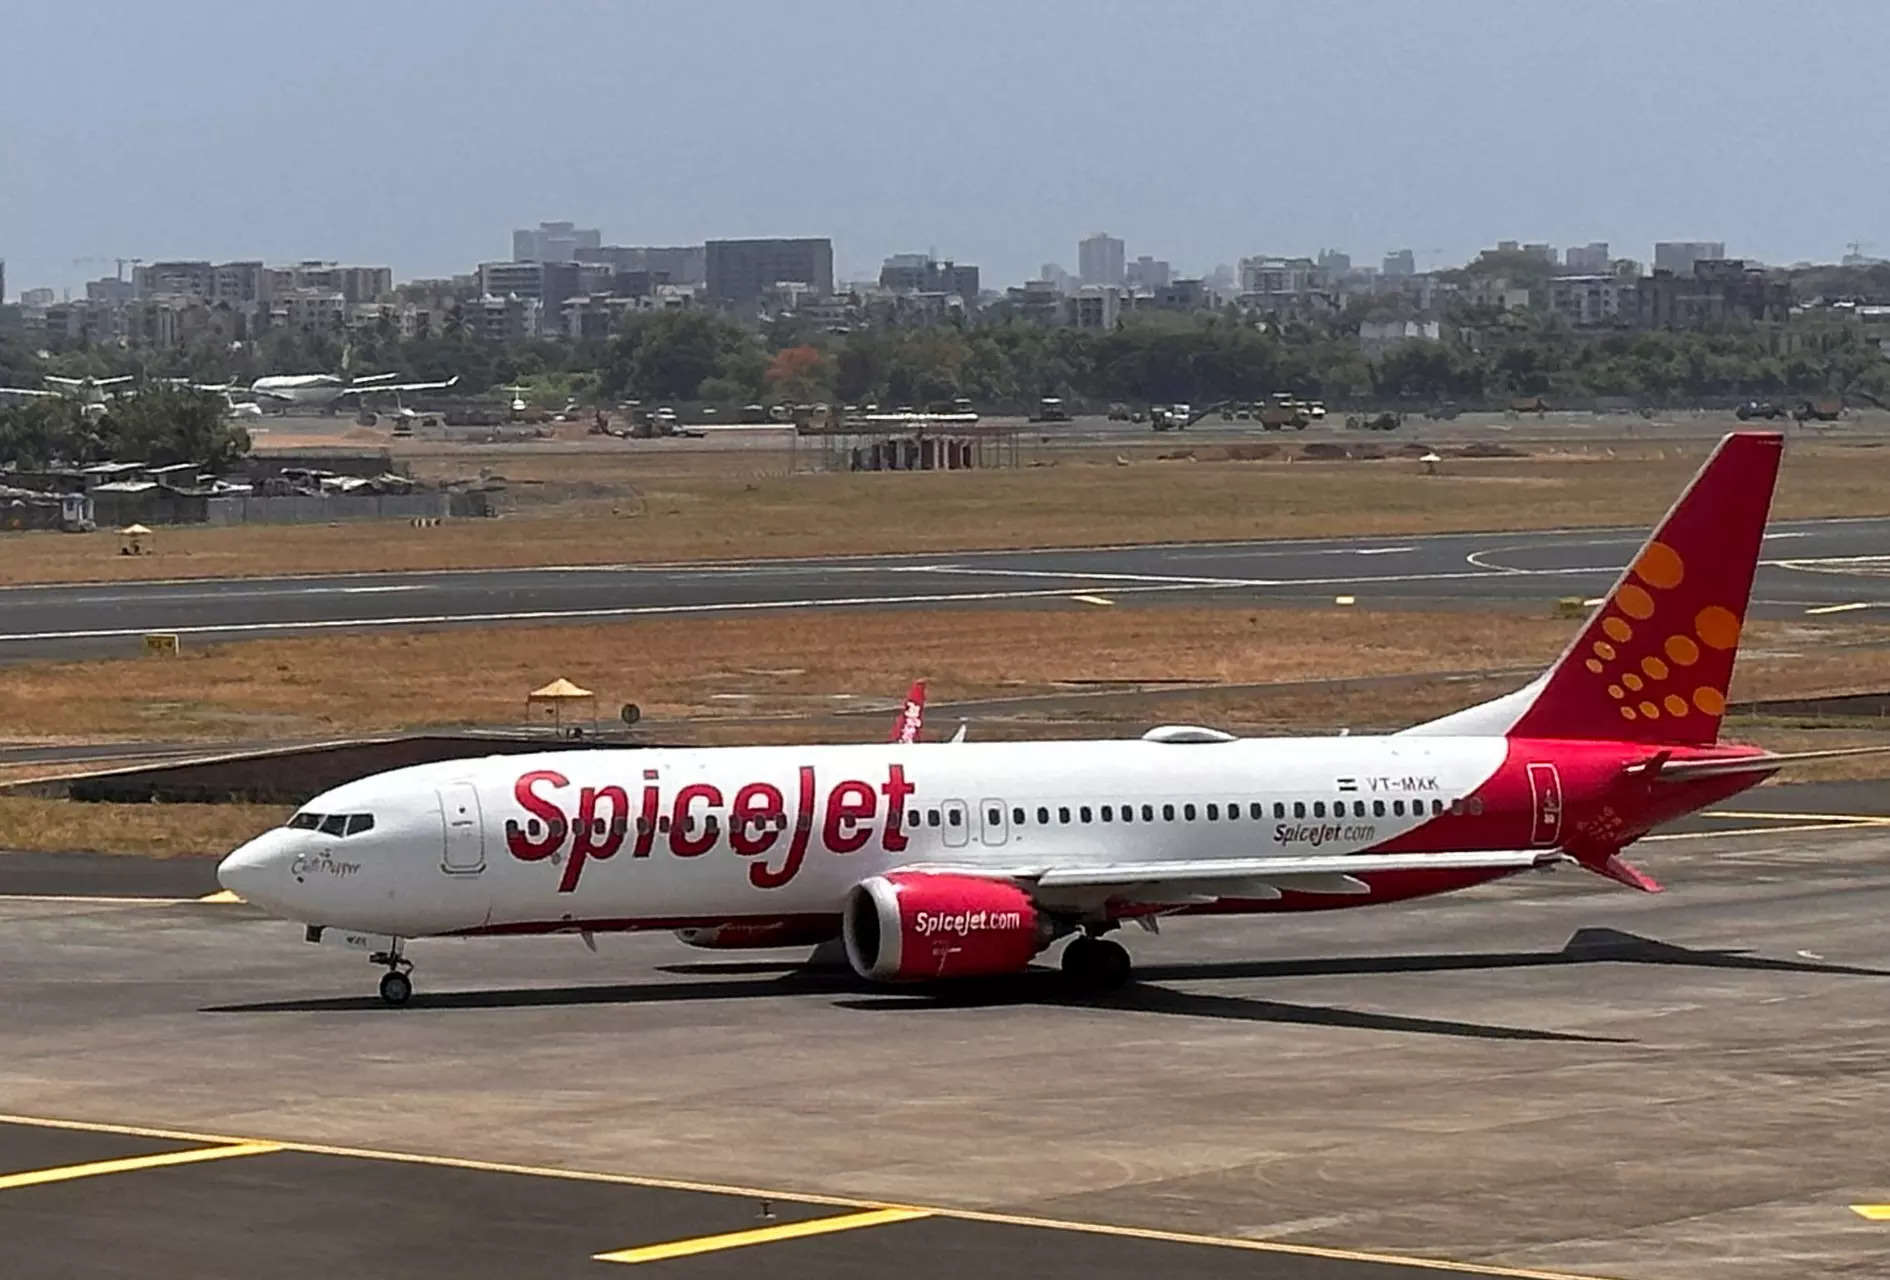 hc orders spicejet to return leased engine